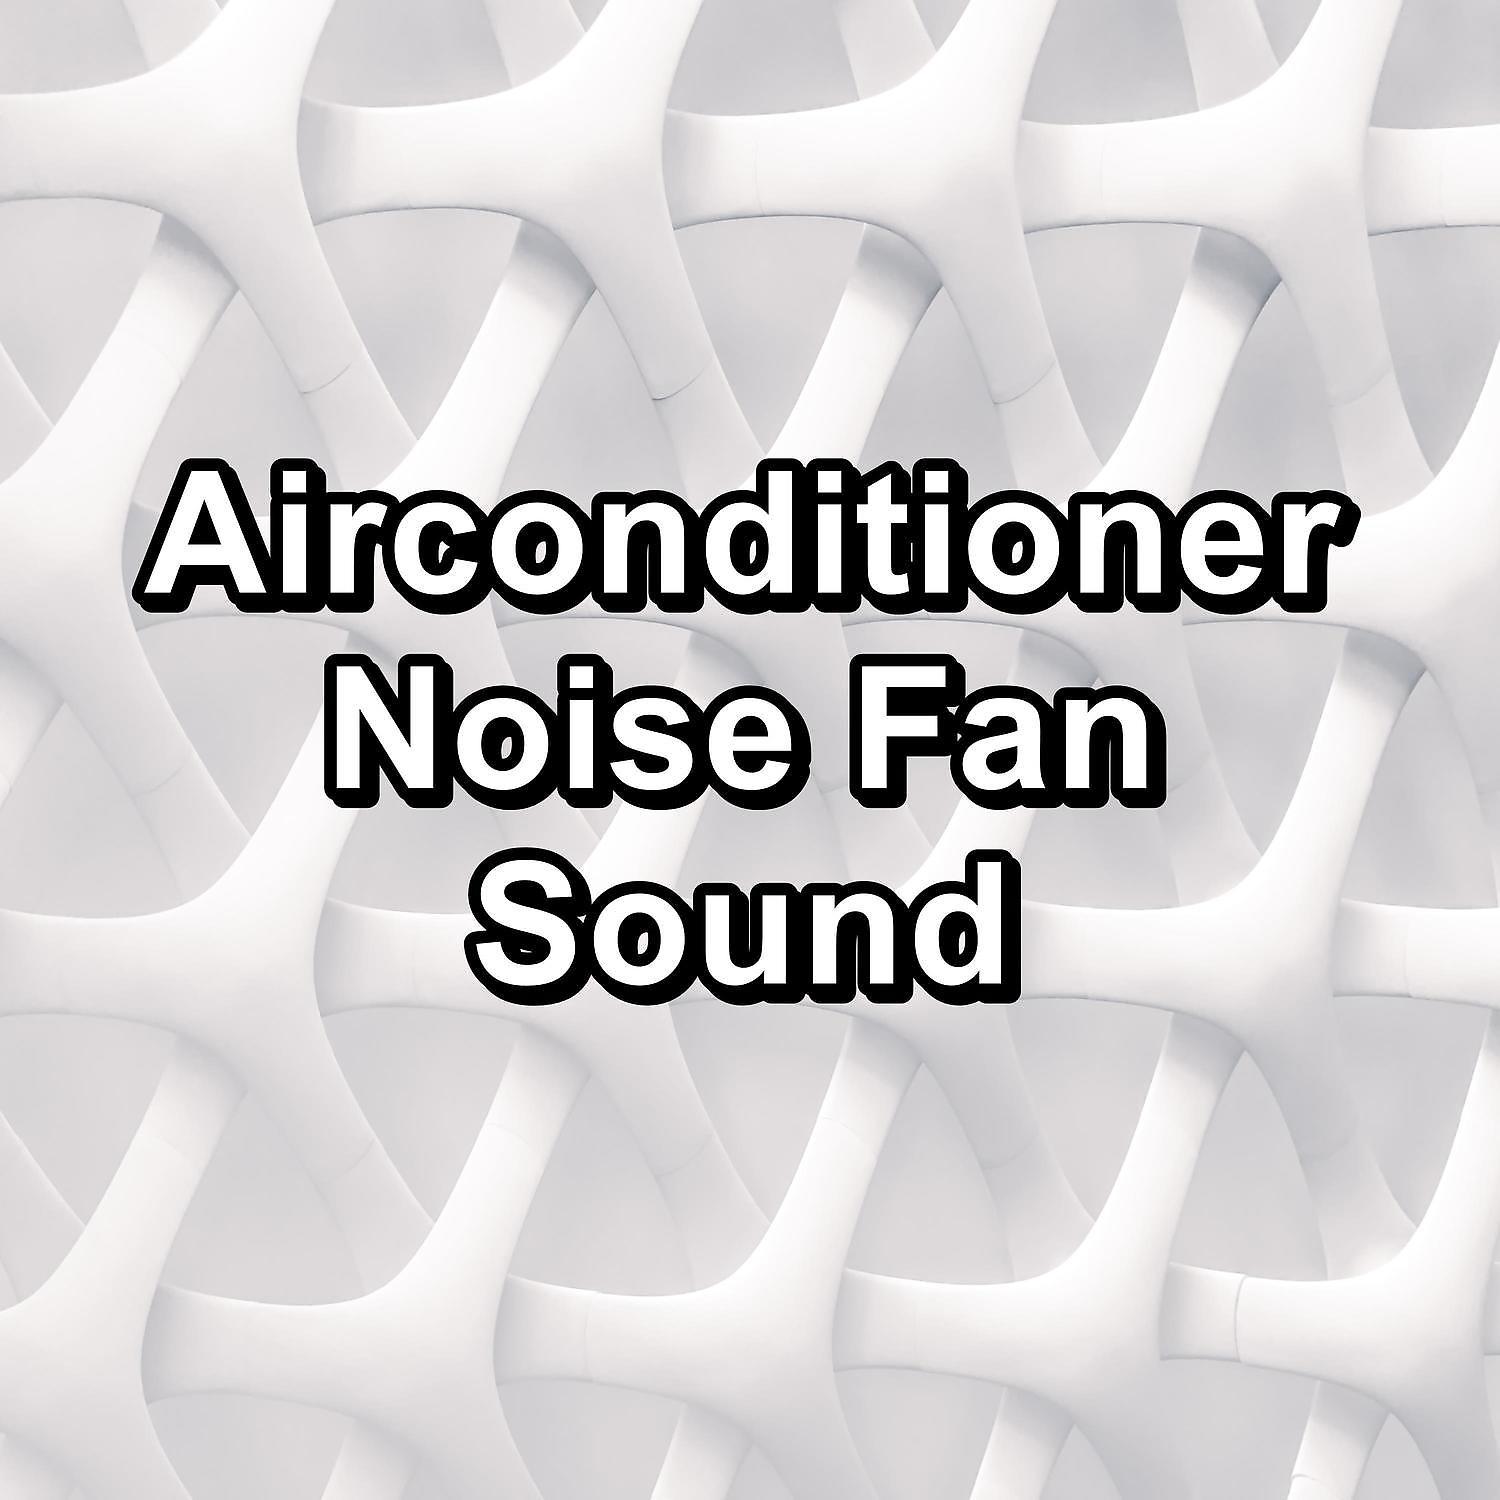 Pink Noise Sound, White Noise Sound, Brown Noise Sound - White Noise Fan Instrumental Music To Loop for 24 Hours